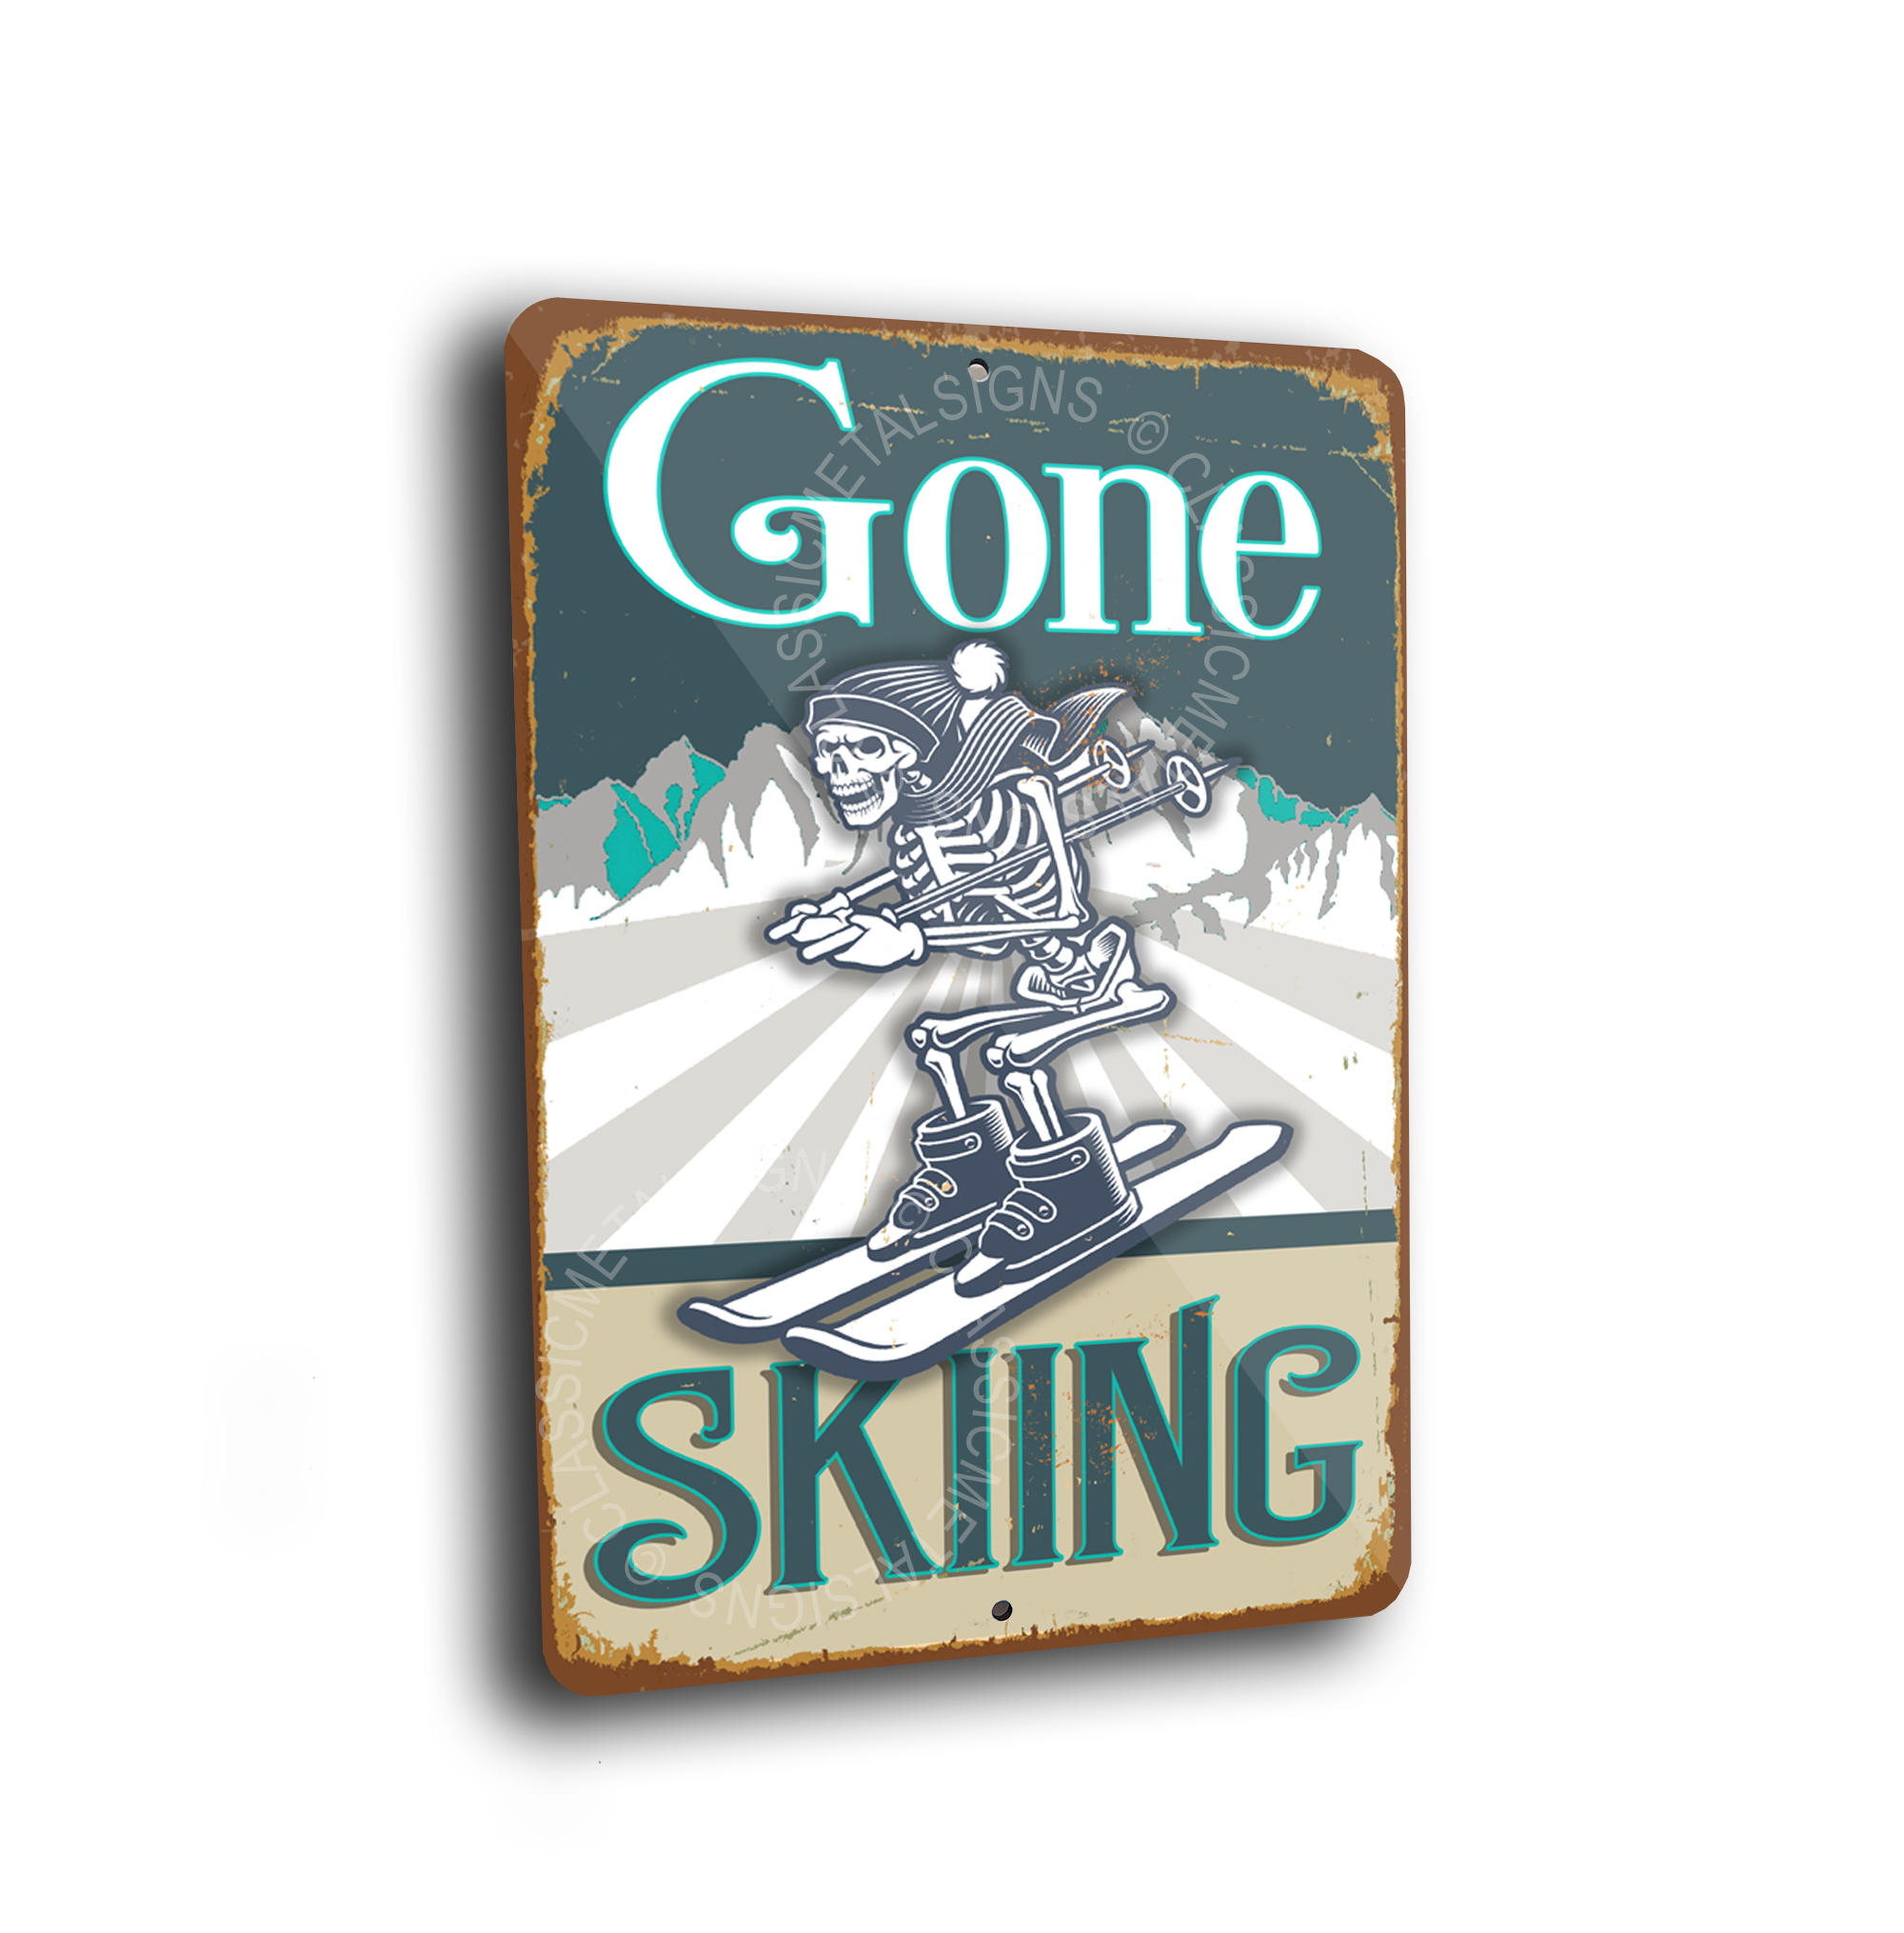 Gone skiing Signs